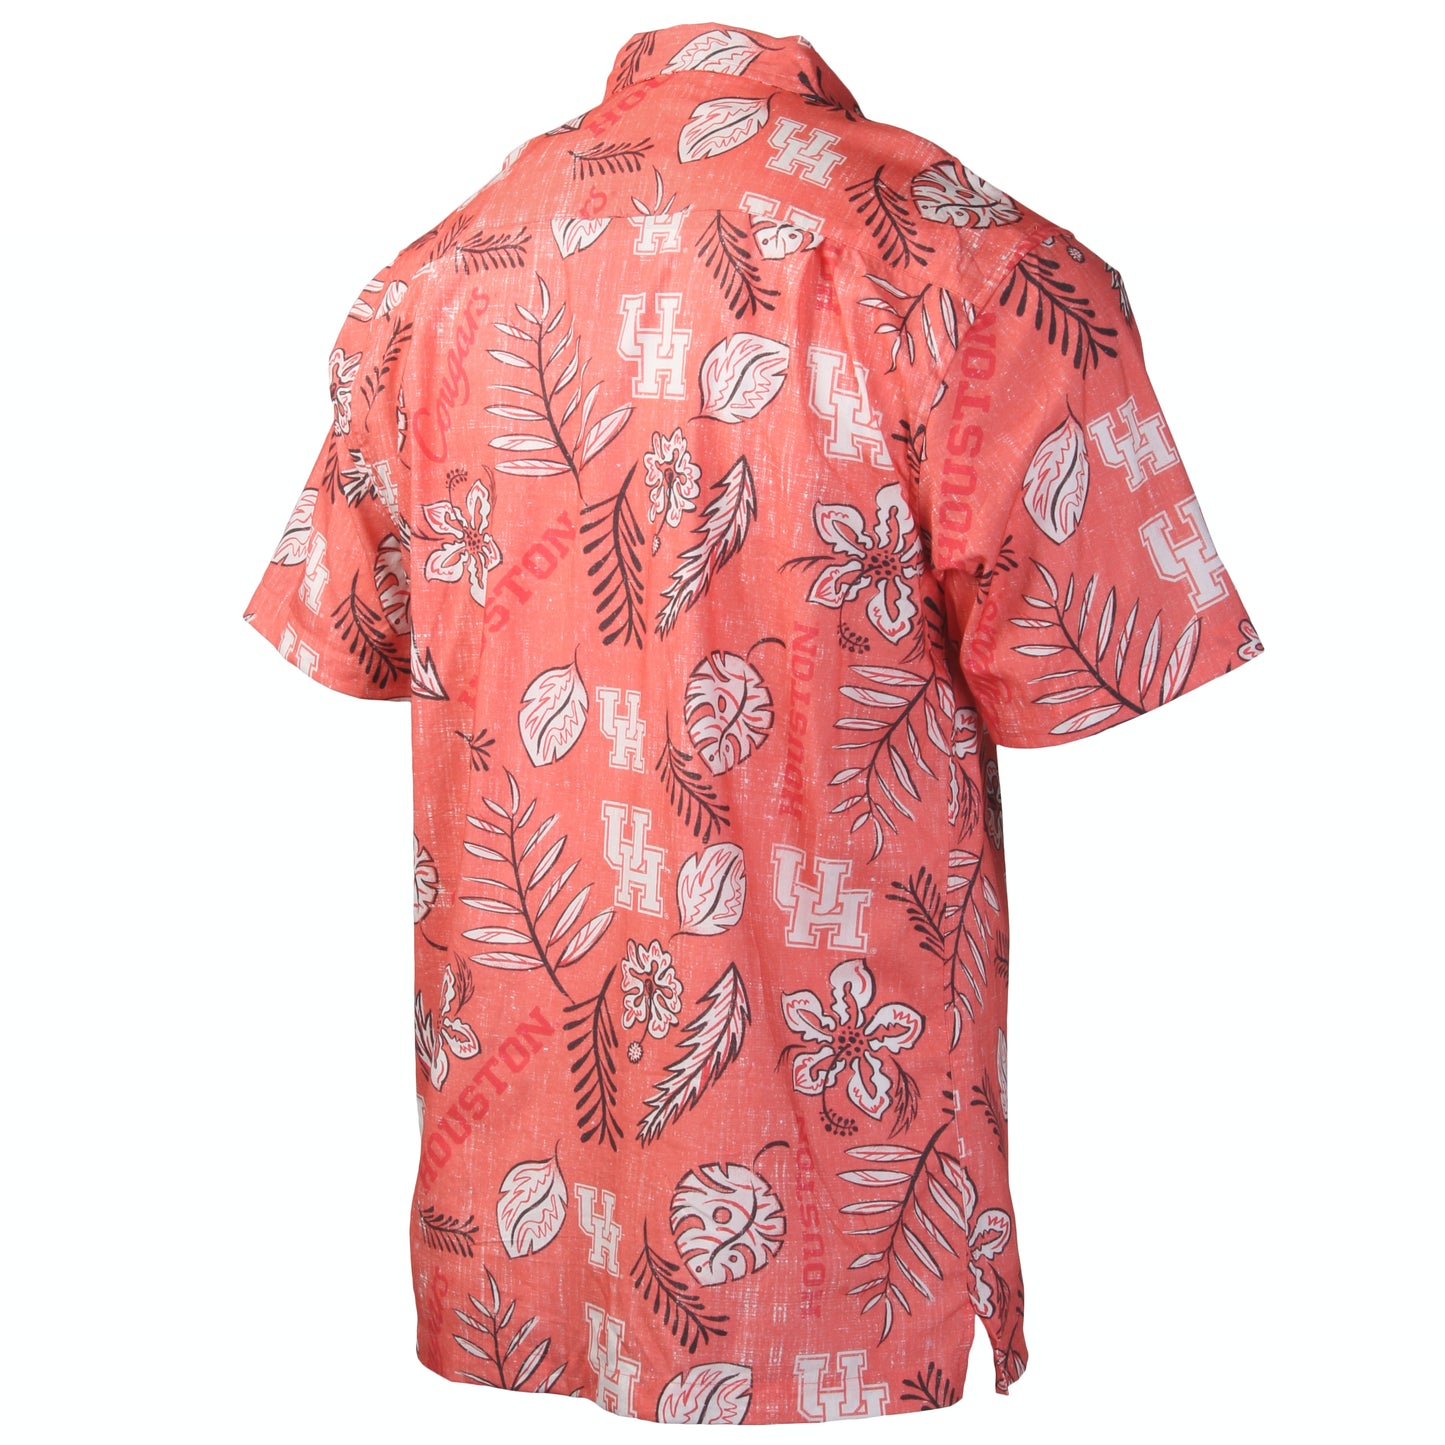 Houston Cougars Wes and Willy Mens College Hawaiian Short Sleeve Button Down Shirt Vintage Floral